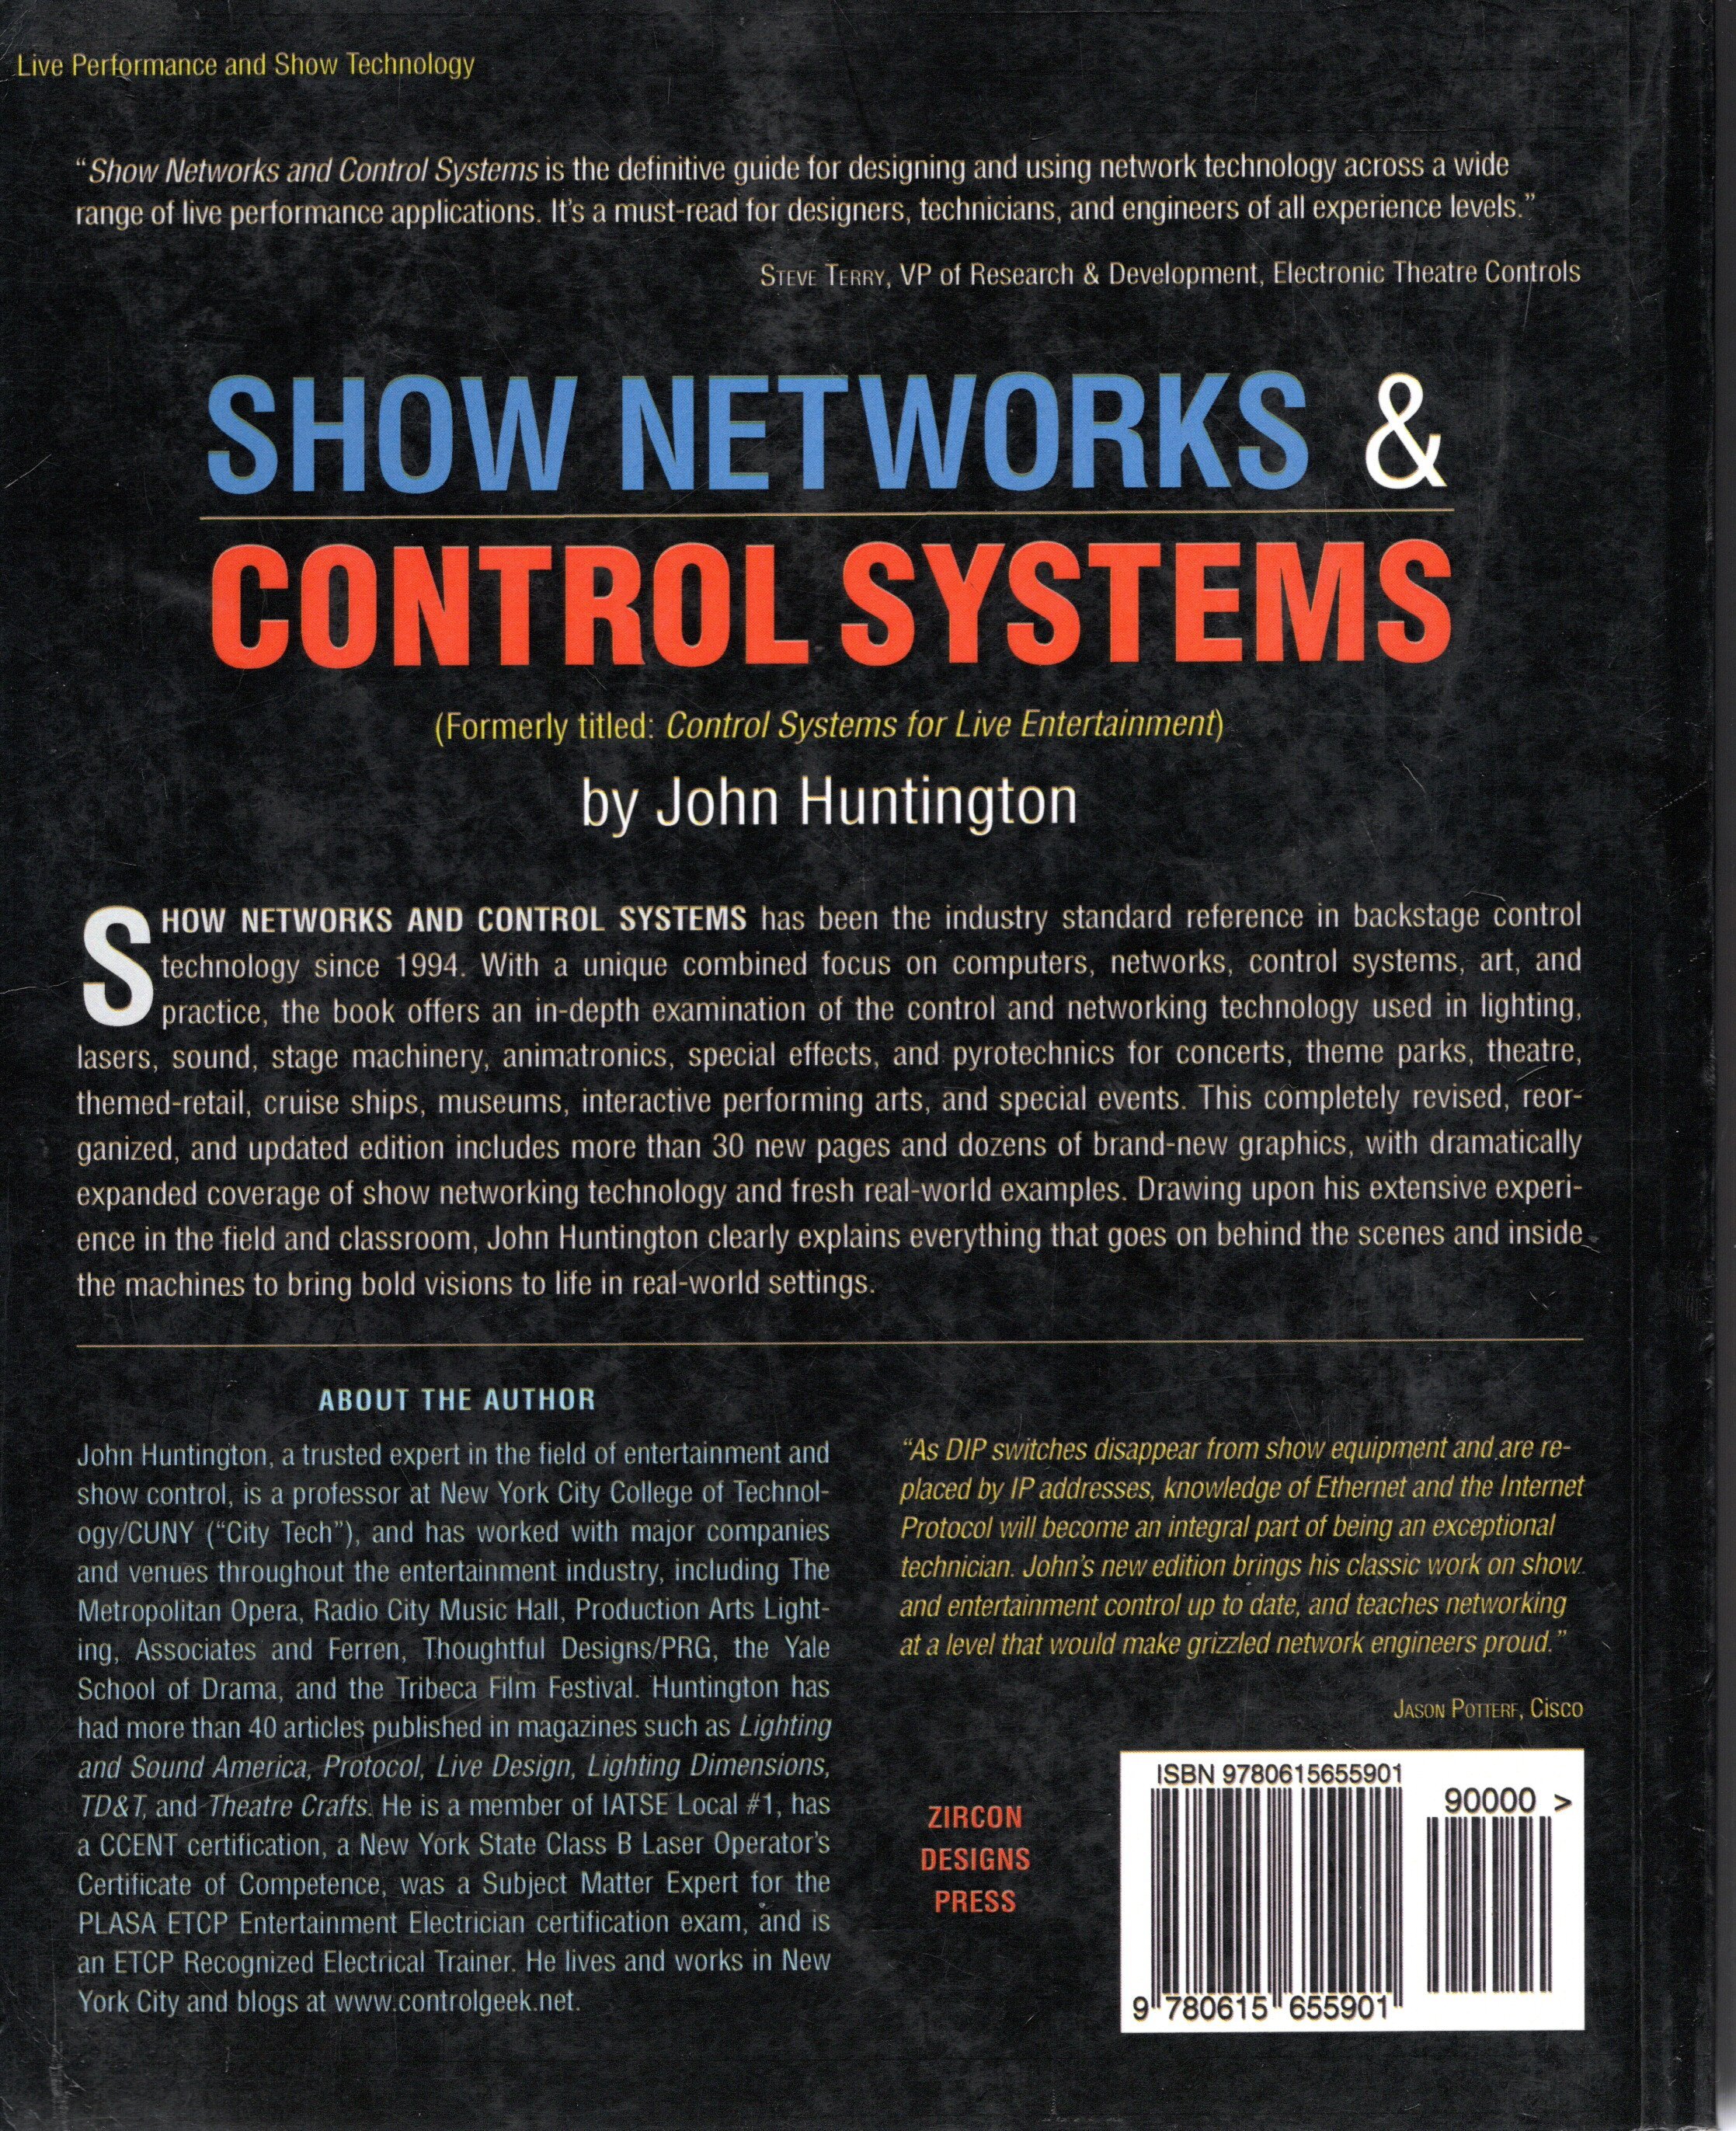 Show Networks and Control Systems Formerly Control Systems for Live Entertainment 